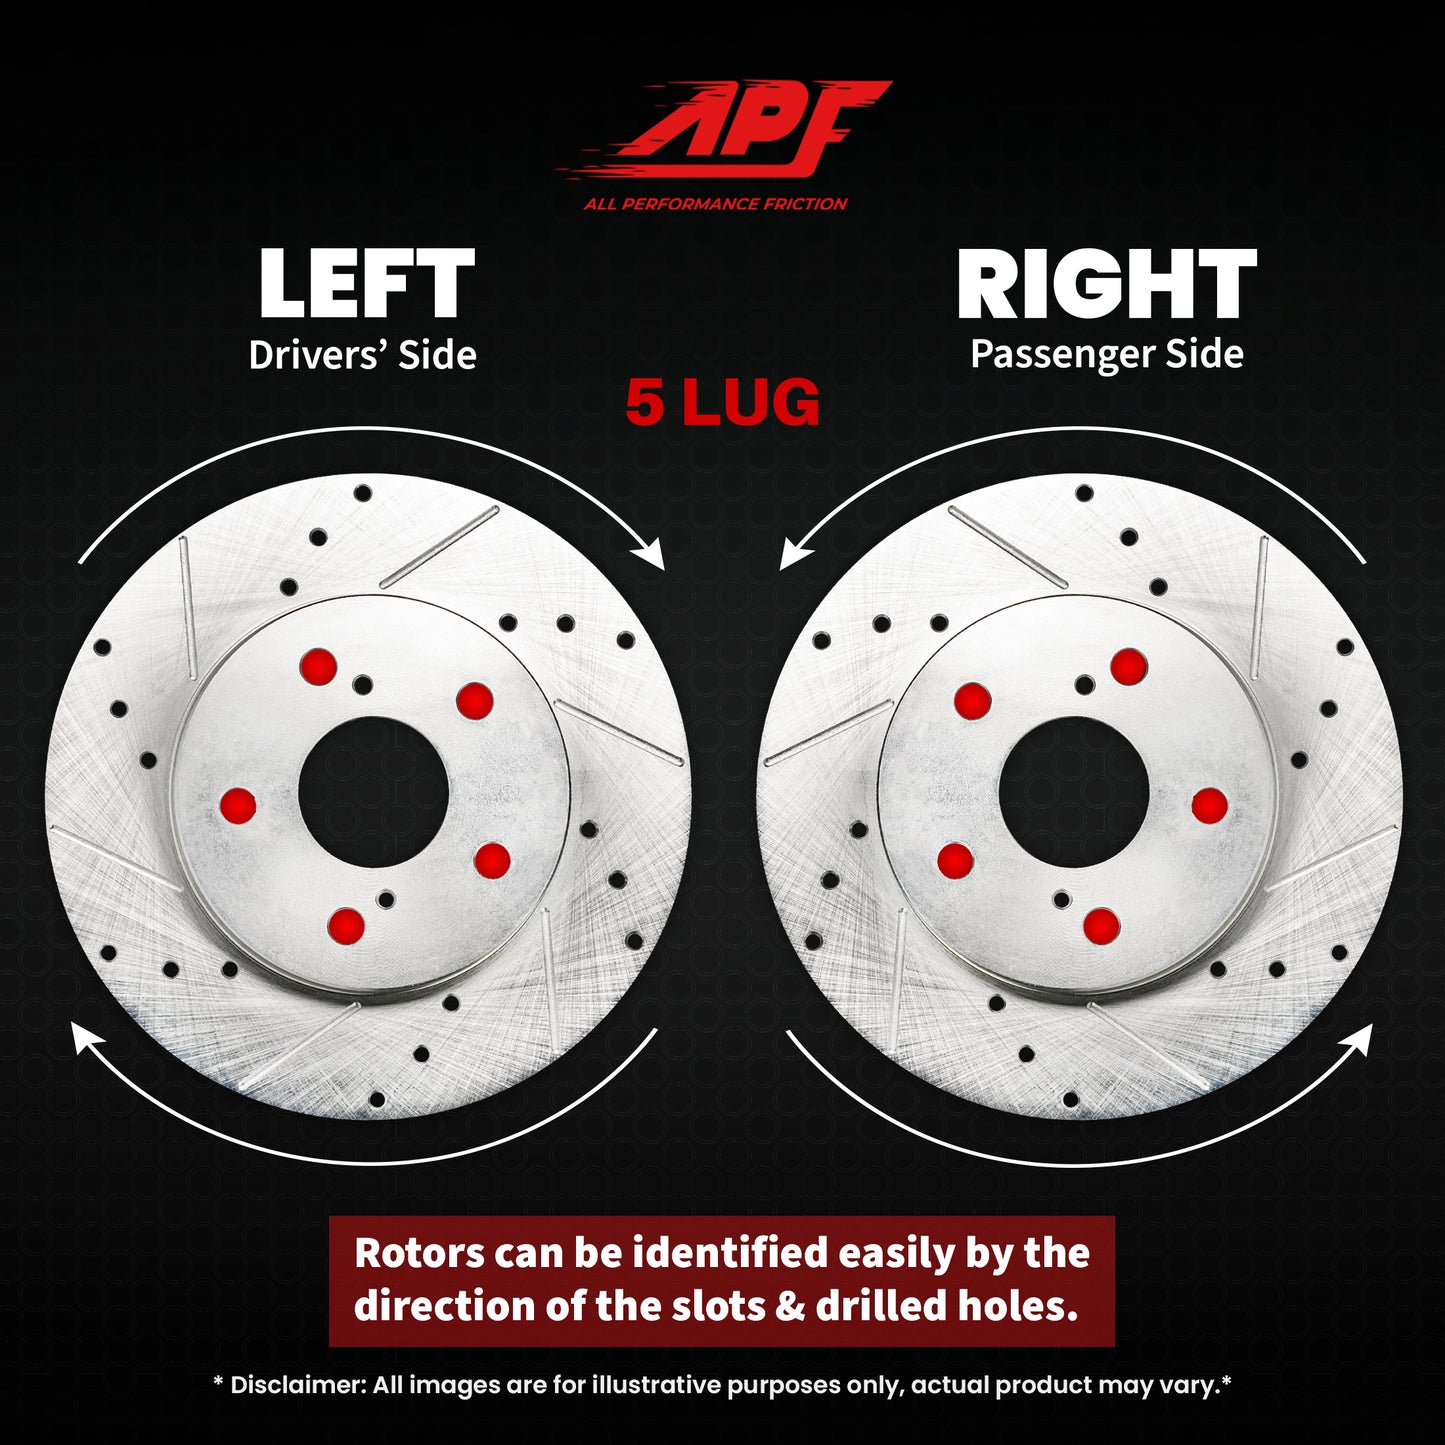 APF All Performance Friction Front Rotors compatible with Chevrolet Uplander 2005-2005 Zinc Drilled Slotted Rotors | $160.37